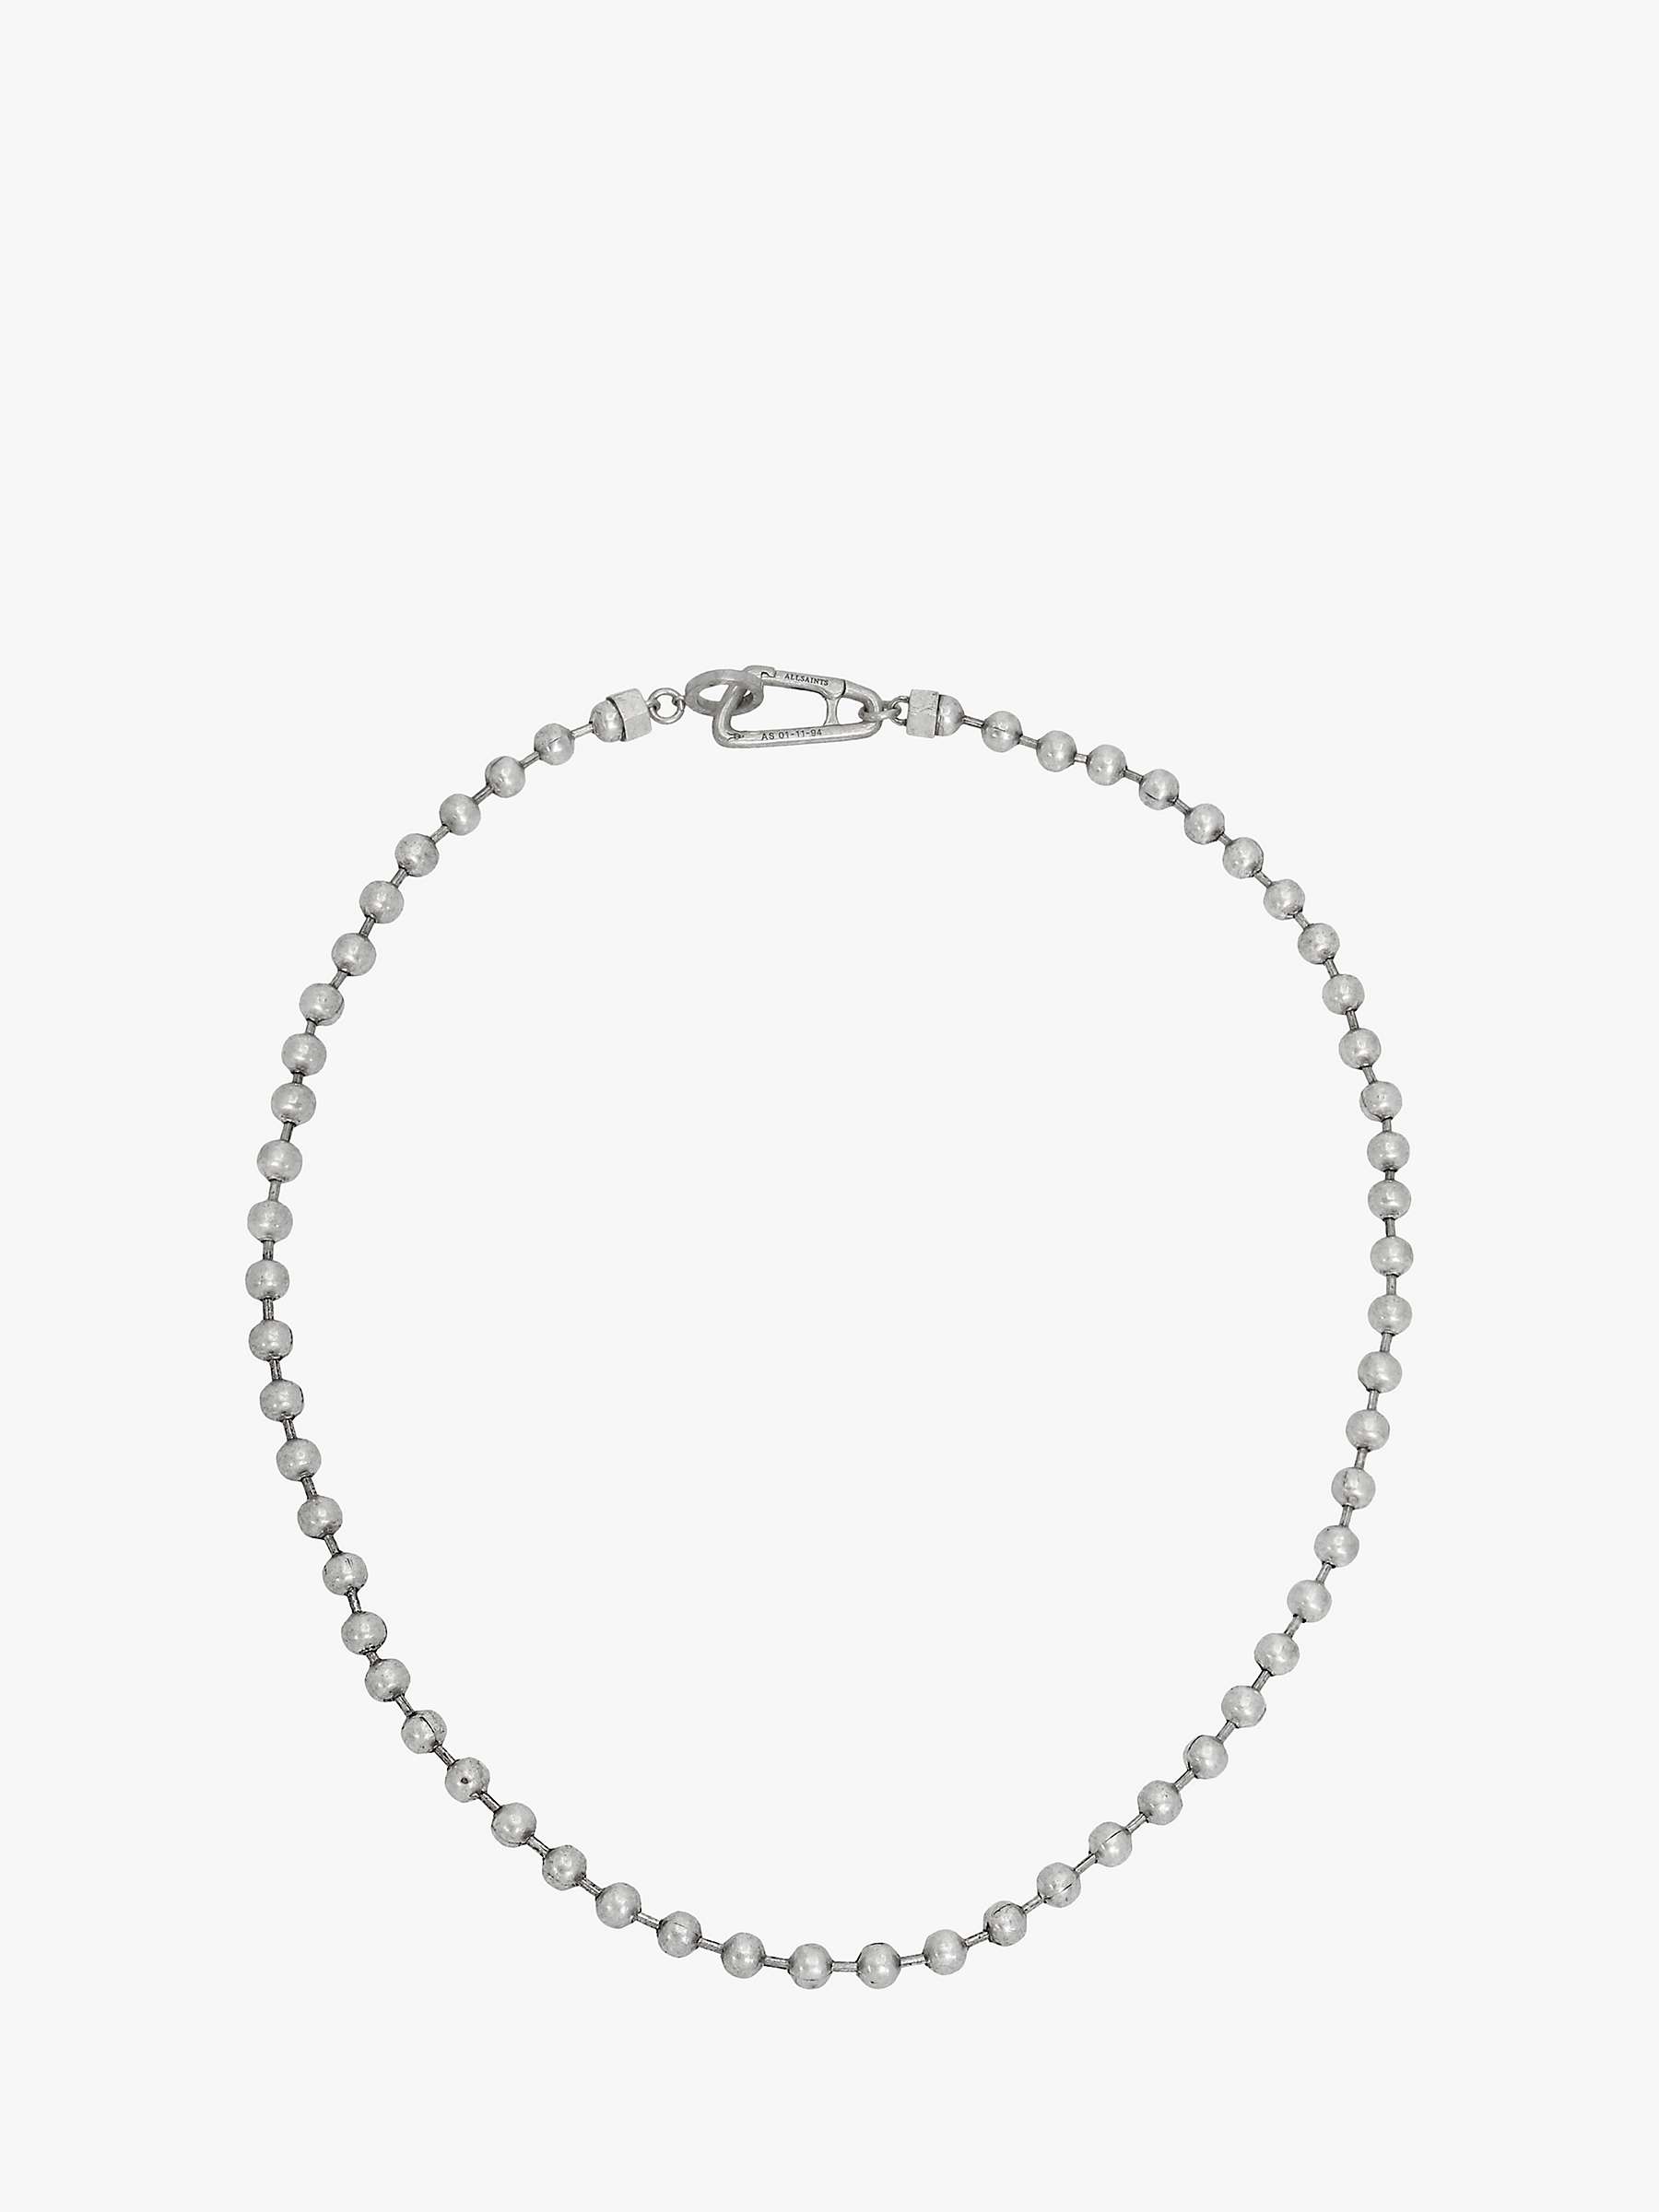 Buy AllSaints Unisex Ball Chain Necklace, Warm Silver Online at johnlewis.com